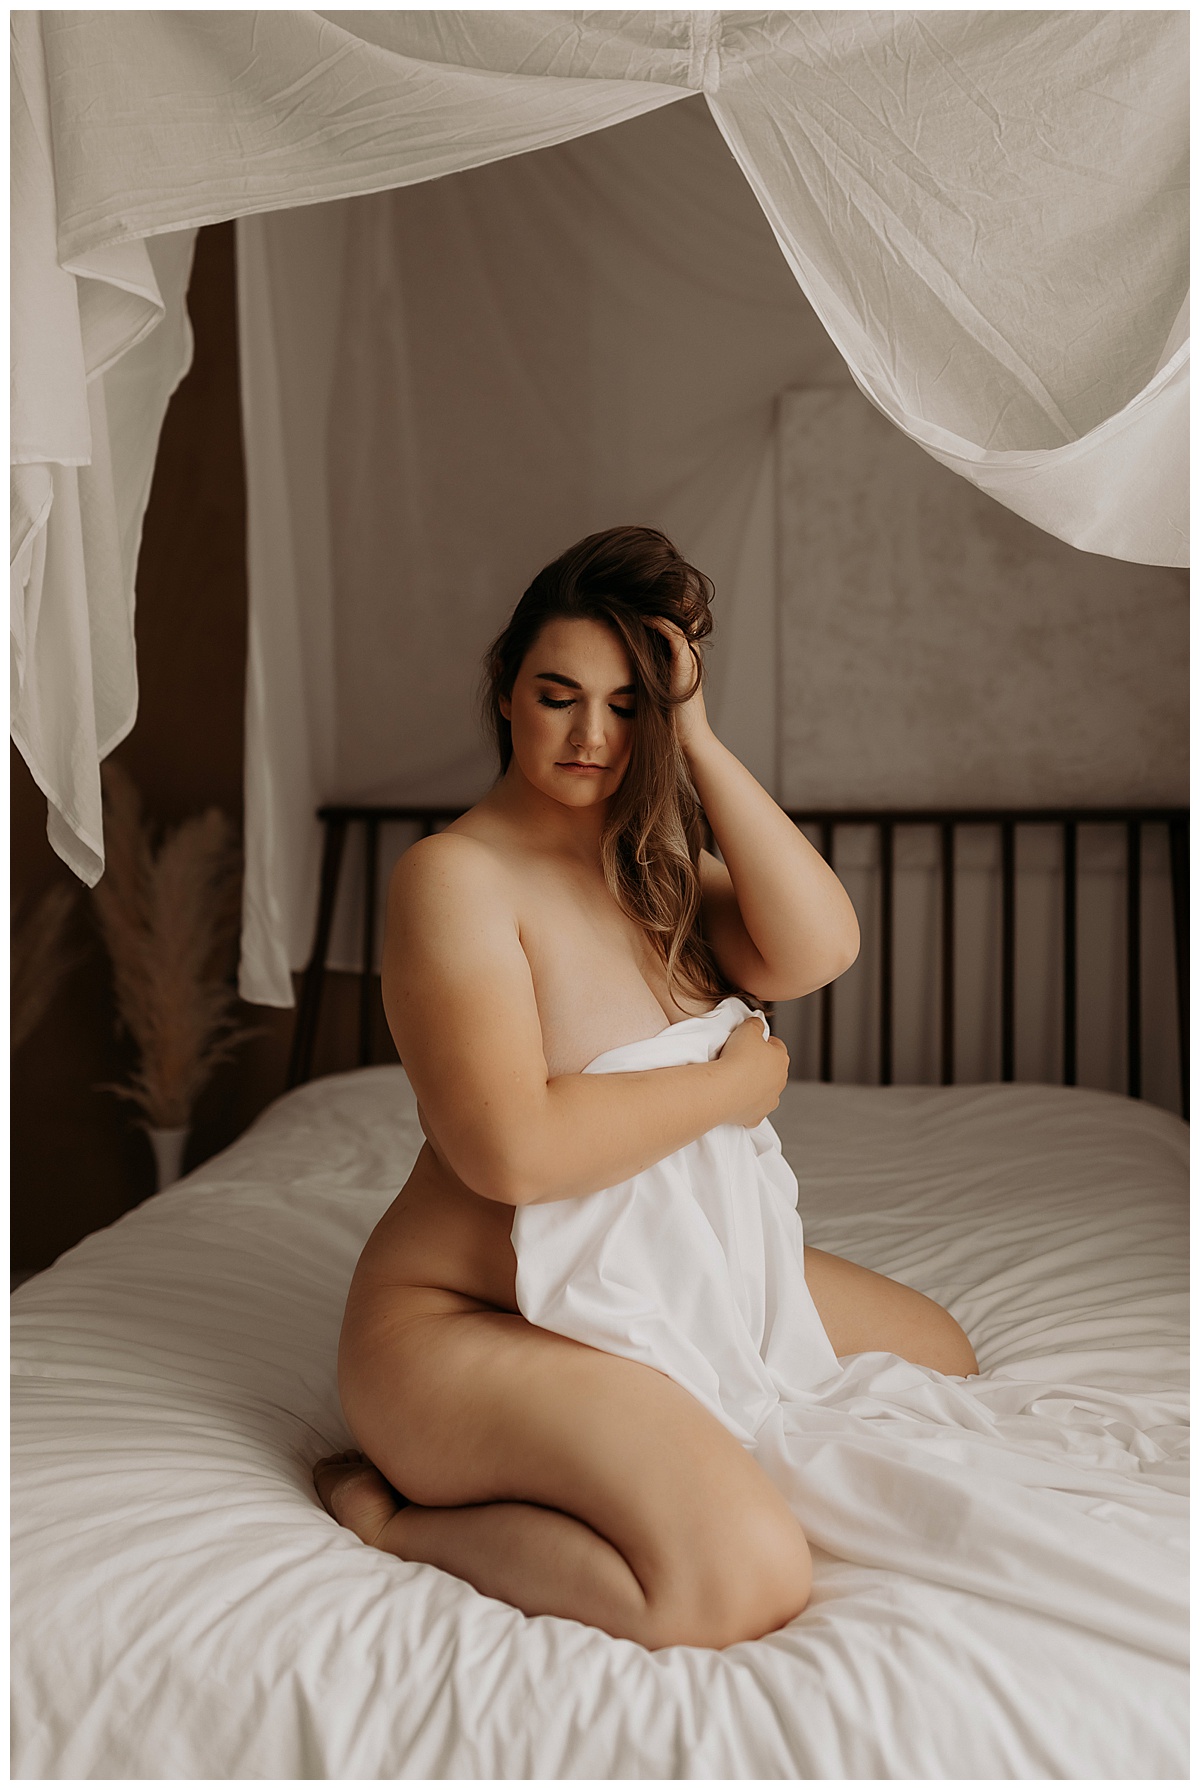 PErson covers body with white towel demonstrating ways to Discover Your Inner Beauty